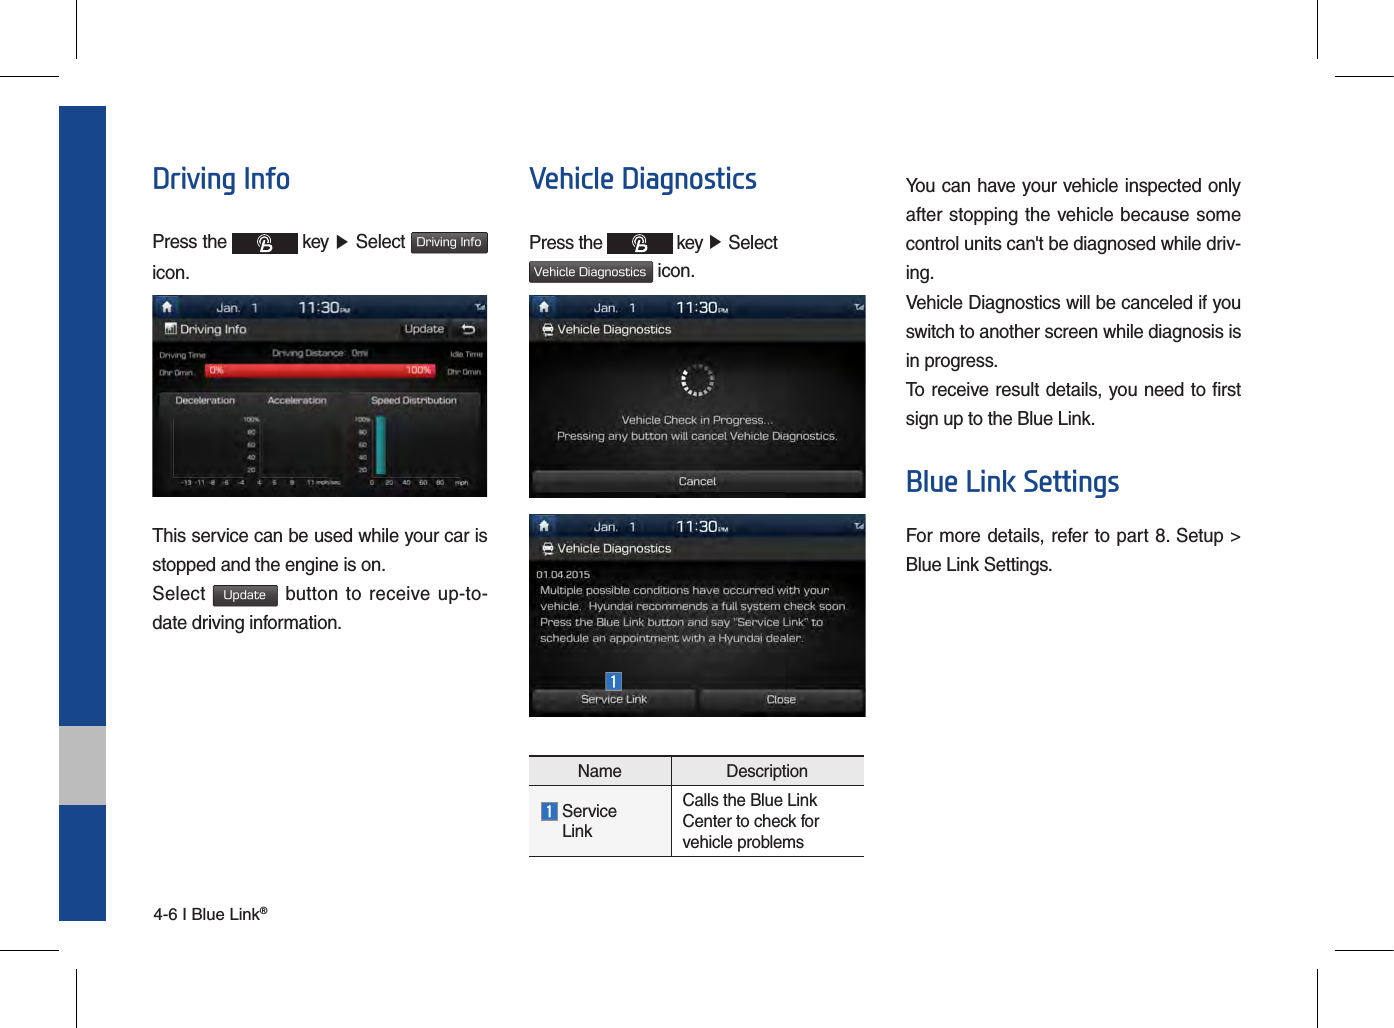 4-6 I Blue Link®Driving InfoPress the   key ▶ Select Driving Info  icon.This service can be used while your car is stopped and the engine is on. Select Update button to  receive up-to-date driving information. Vehicle DiagnosticsPress the   key ▶ Select Vehicle Diagnostics icon.Name Description  Service  LinkCalls the Blue Link Center to check for vehicle problemsYou can have your vehicle inspected only after stopping the vehicle because some control units can&apos;t be diagnosed while driv-ing.Vehicle Diagnostics will be canceled if you switch to another screen while diagnosis is in progress.To receive result details, you need to first sign up to the Blue Link.Blue Link SettingsFor more details, refer to part 8. Setup &gt; Blue Link Settings.